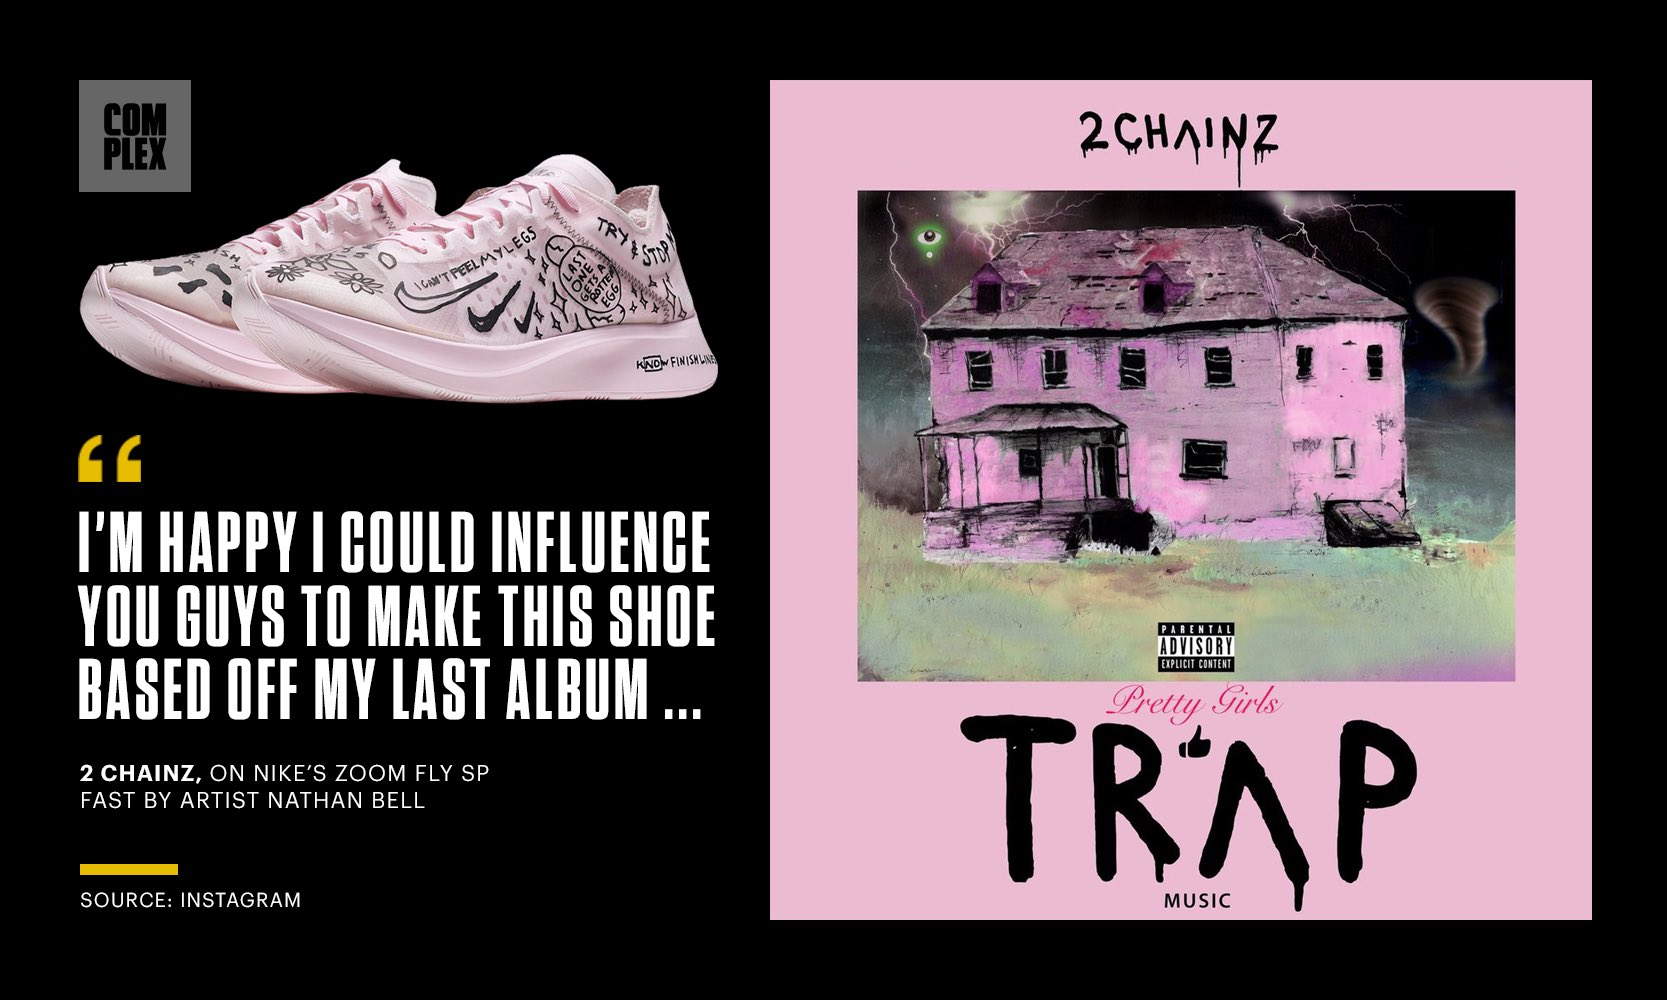 Nike for ripping off his album artwork 